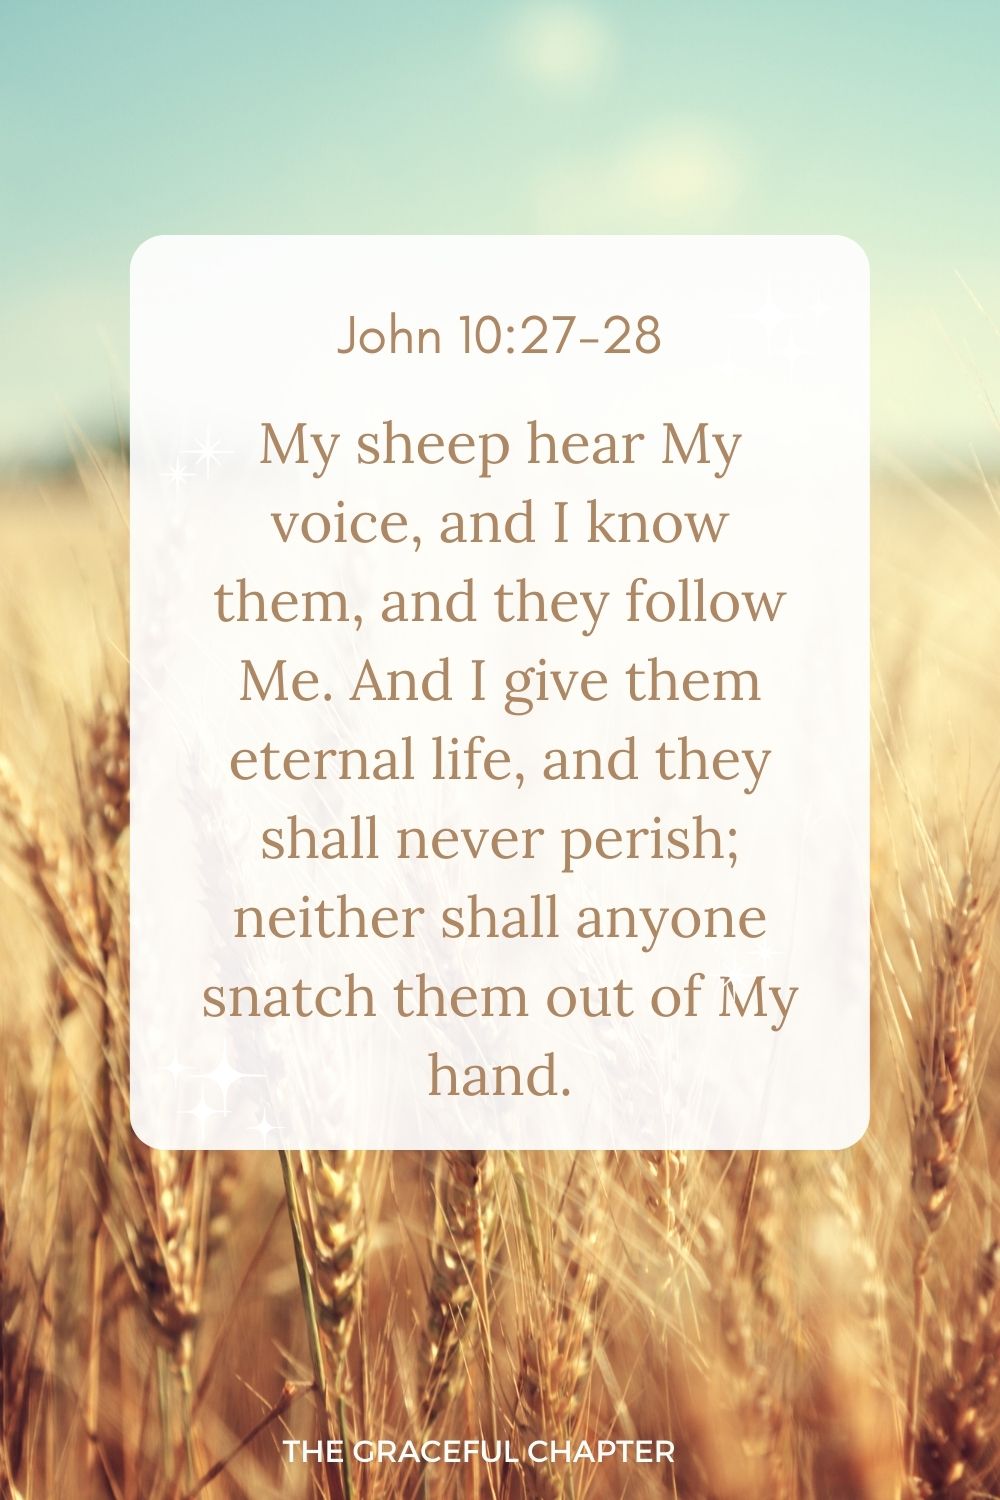 My sheep hear My voice, and I know them, and they follow Me. And I give them eternal life, and they shall never perish; neither shall anyone snatch them out of My hand. John 10:27-28